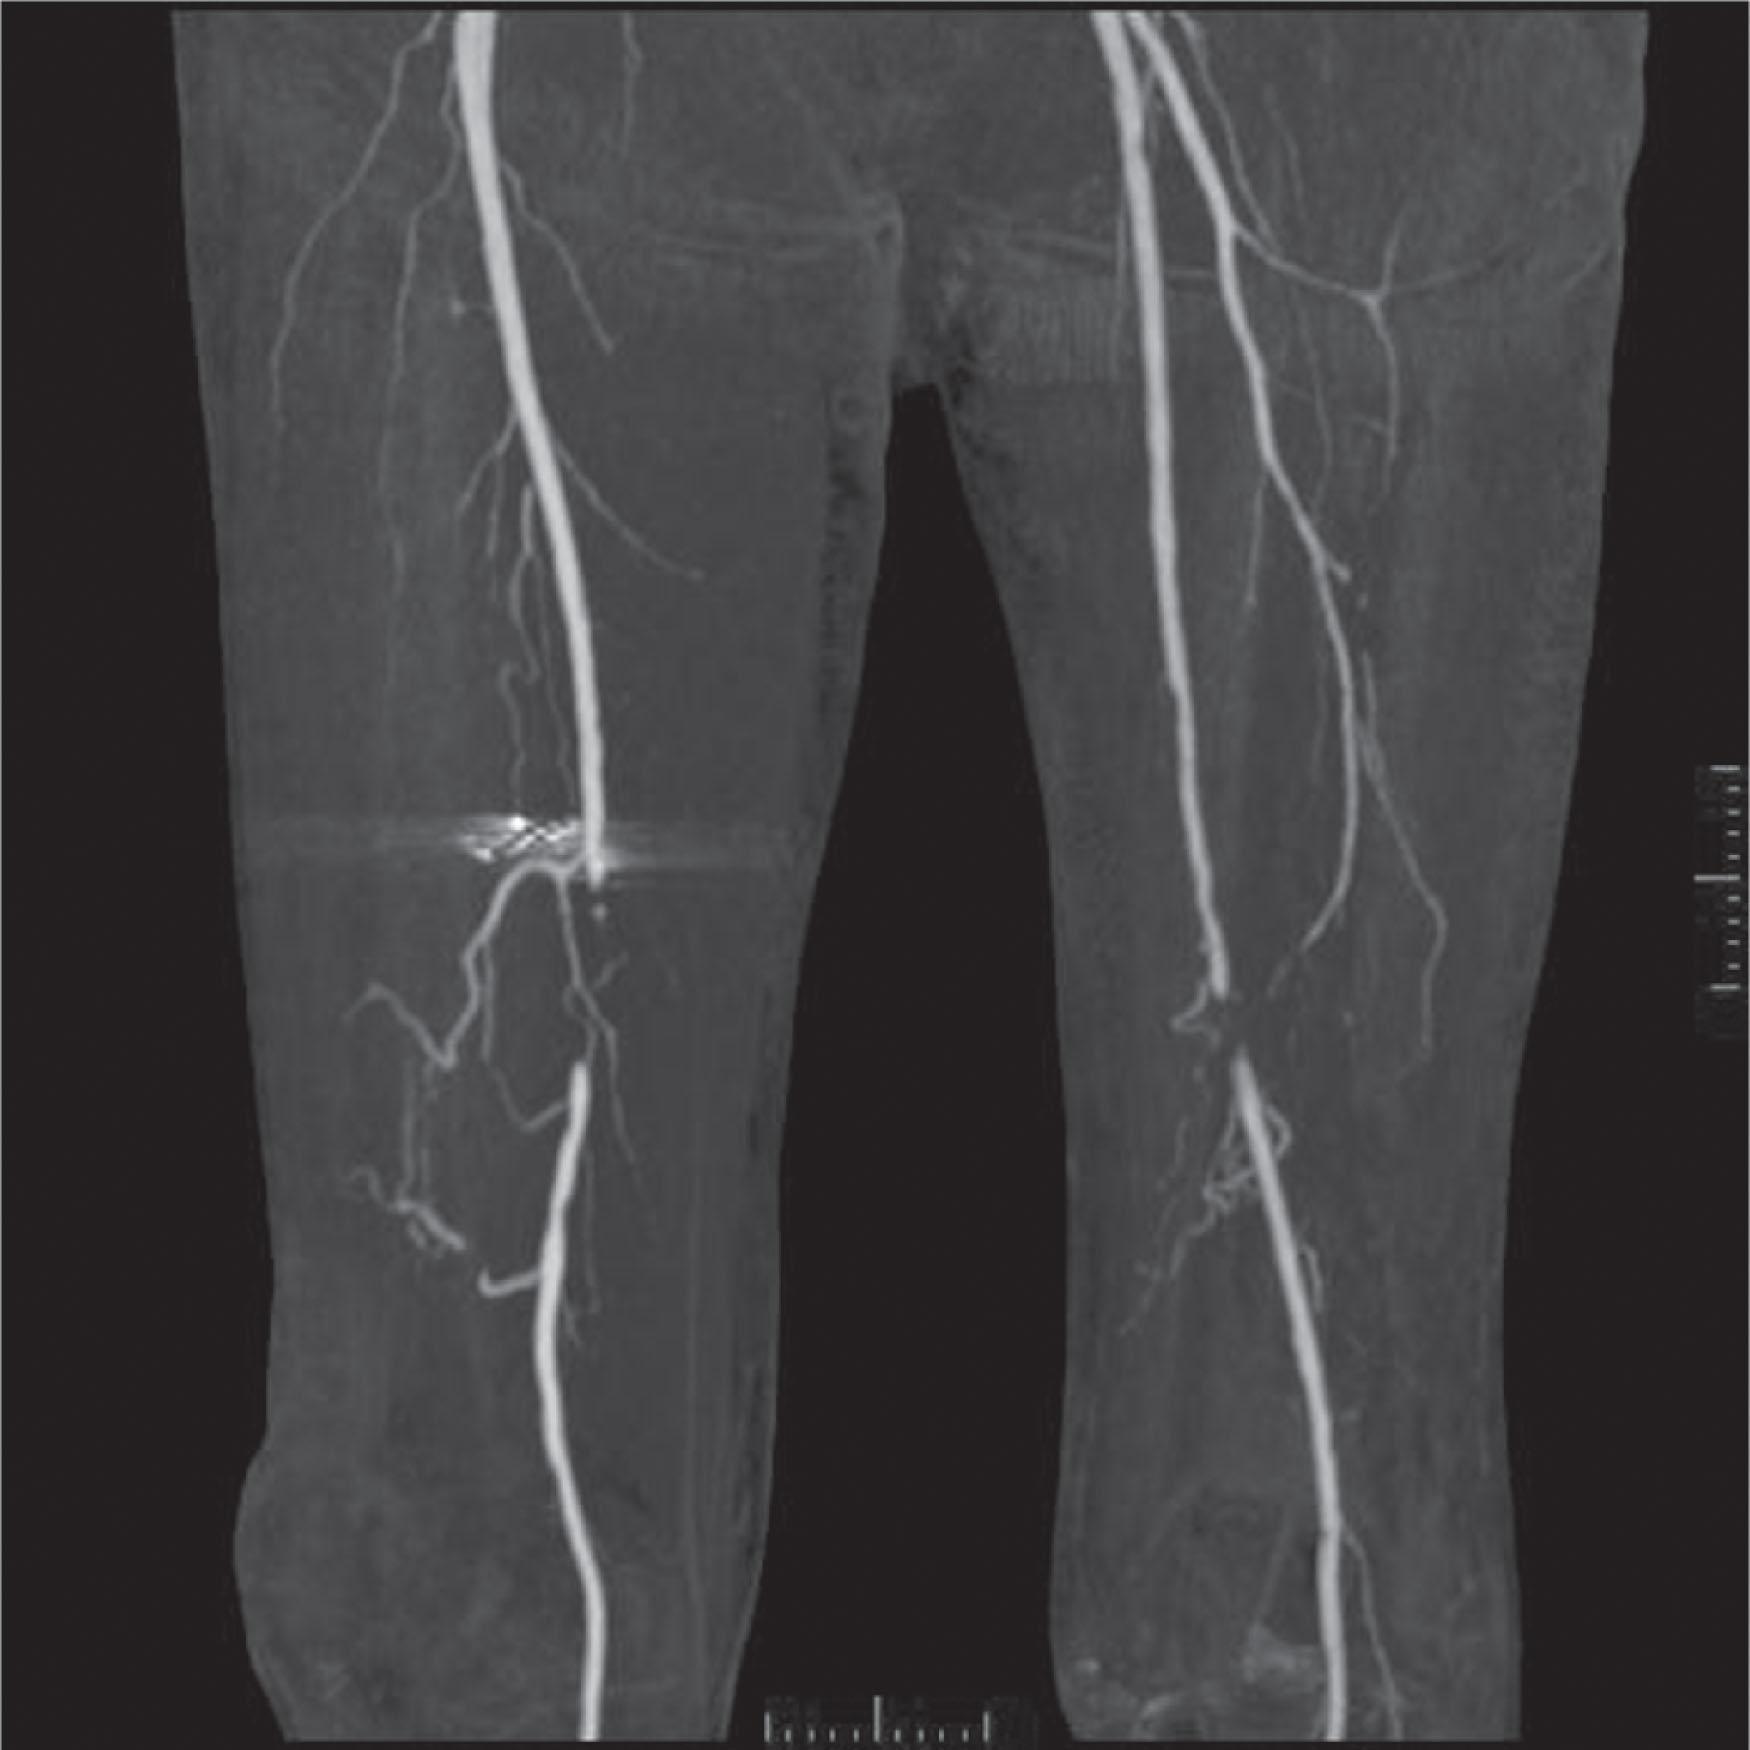 Figure 5.5, Preoperative computed tomographic angiogram revealing collateral flows on bilateral femoral arteries for a patient with diabetes and poor pedal pulses. The use of computed tomography angiography may obtain vascular information of the recipient region without the risk of complications. The preoperative is selectively recommended in patients who have loss of one or more peripheral pulses, a neurological deficit secondary to the injury, or a compound fracture of the extremity that has undergone reduction and either external or internal fixation.